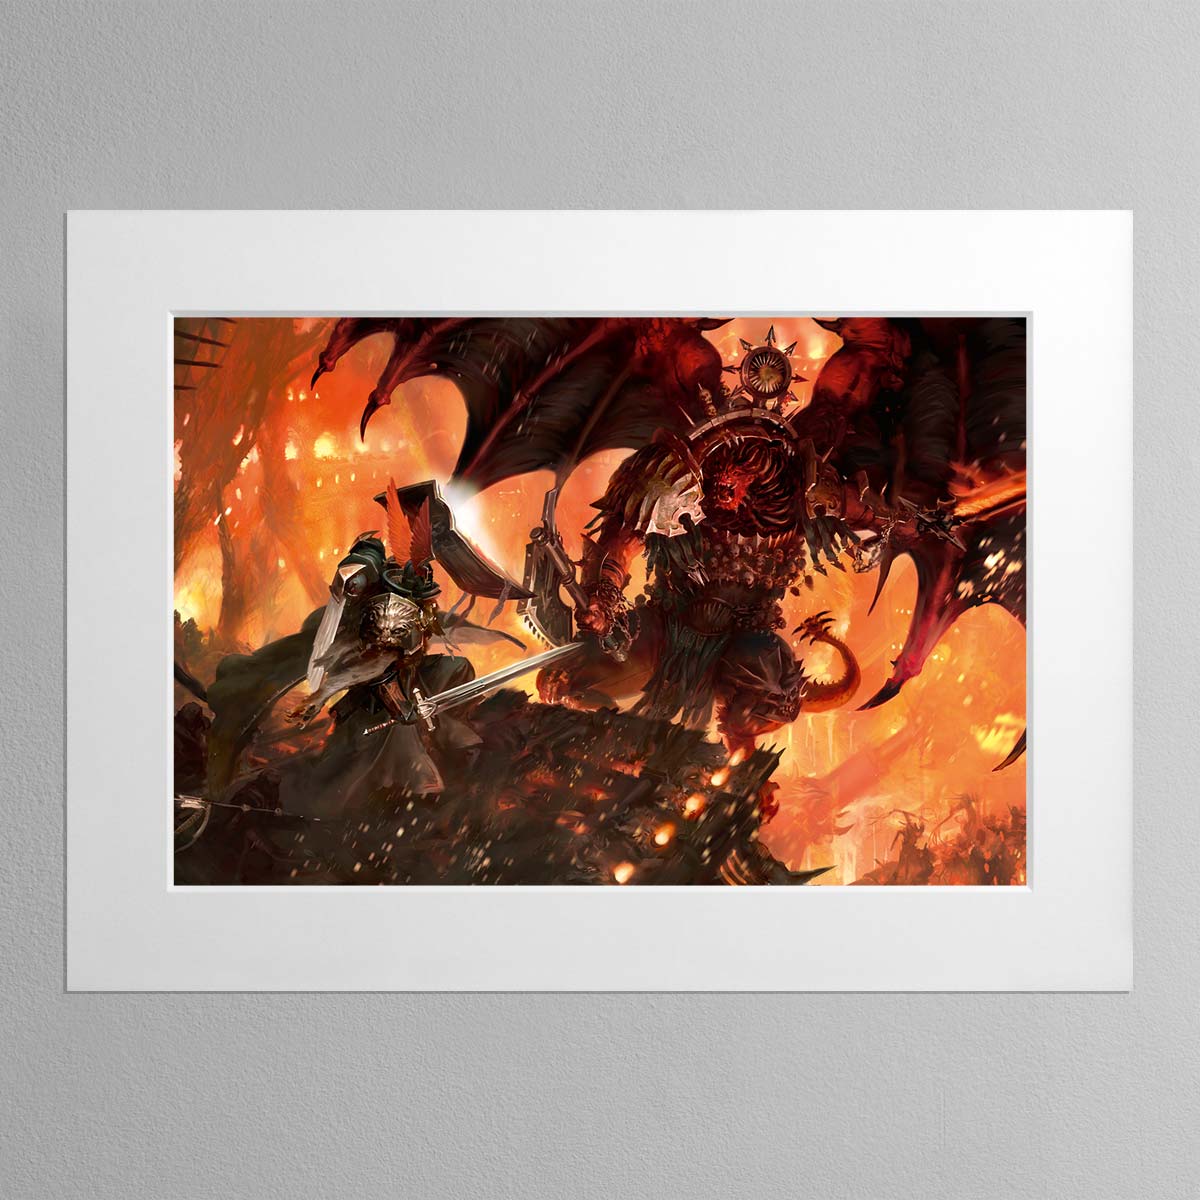 Duel of the Ages – Mounted Print